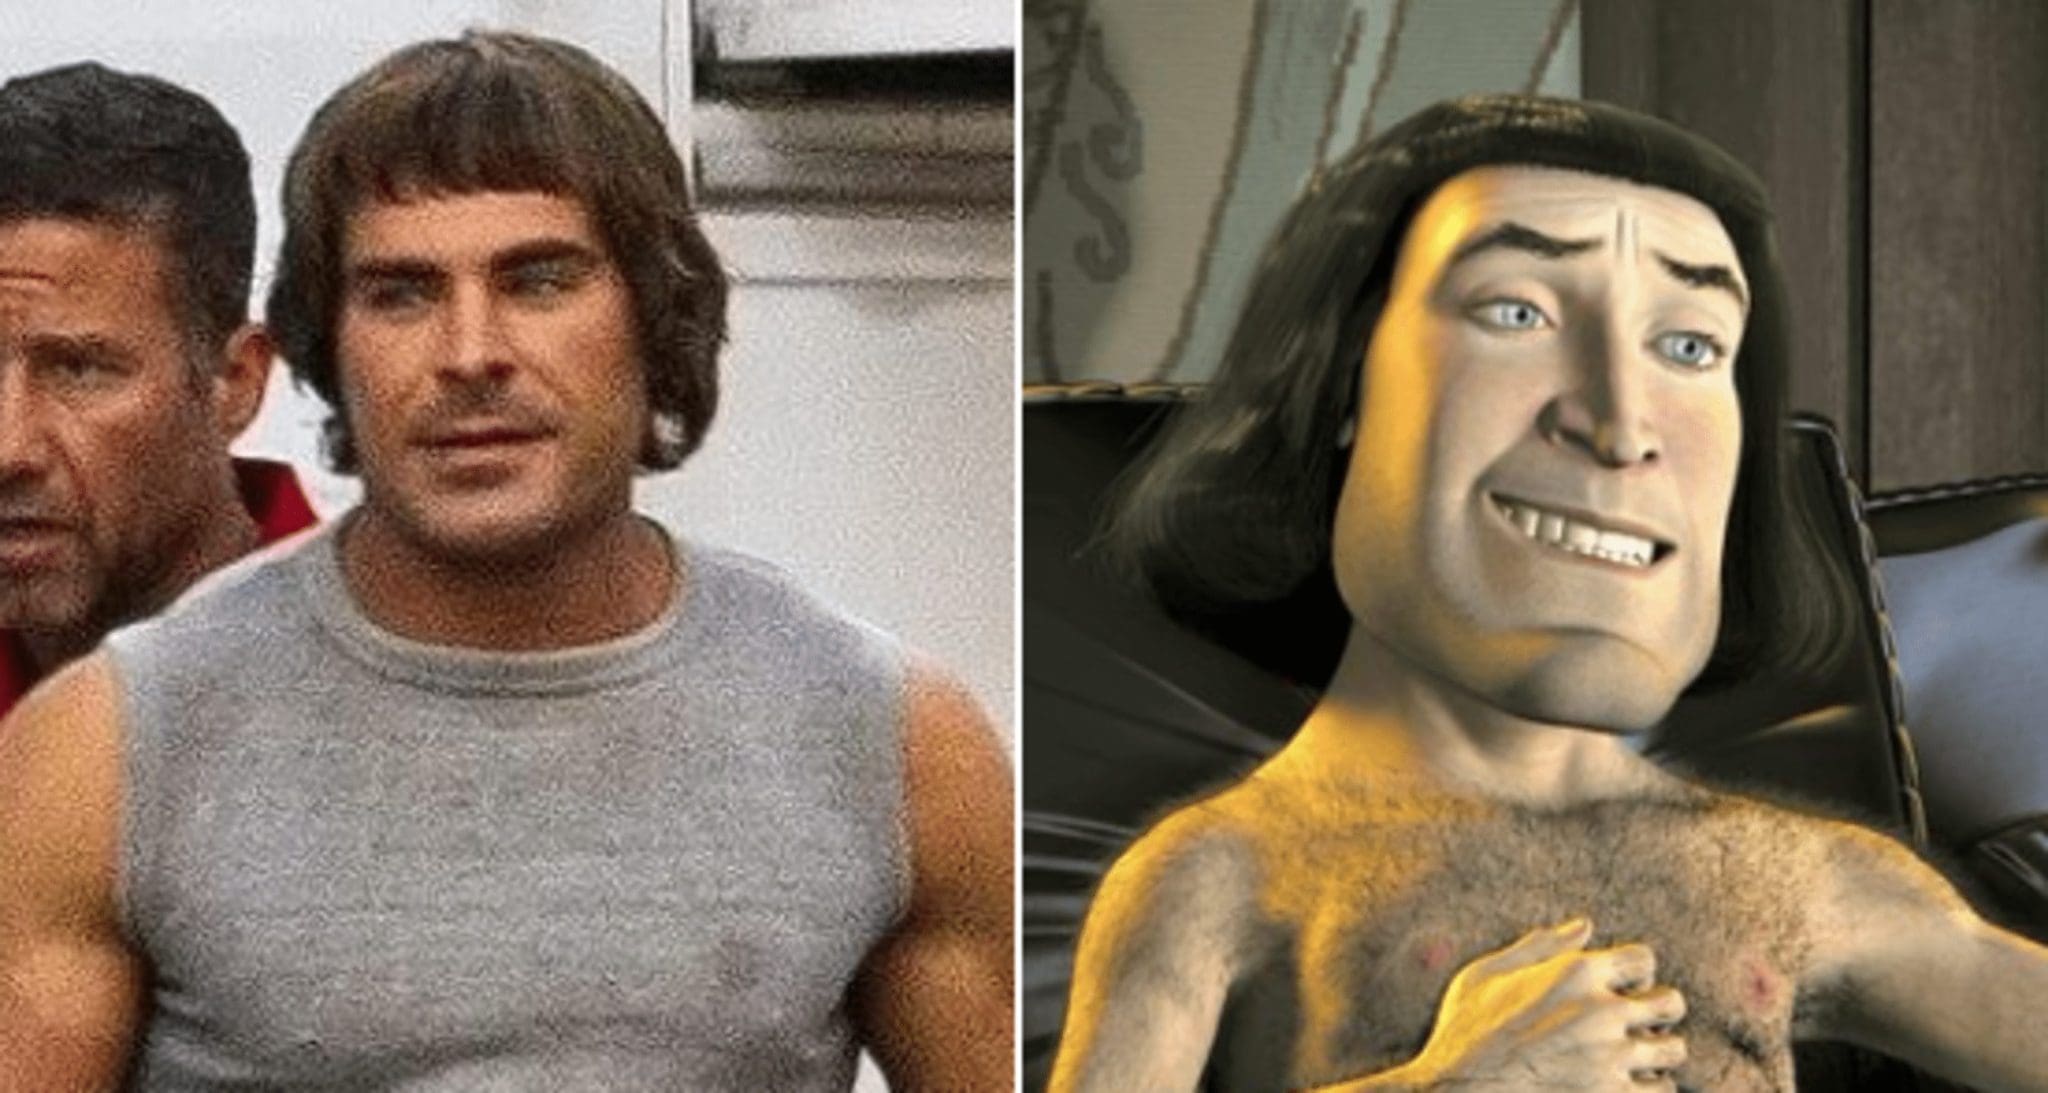 Twitter users have drawn comparisons between Zac Efron and Lord Farquaad from the Shrek franchise.